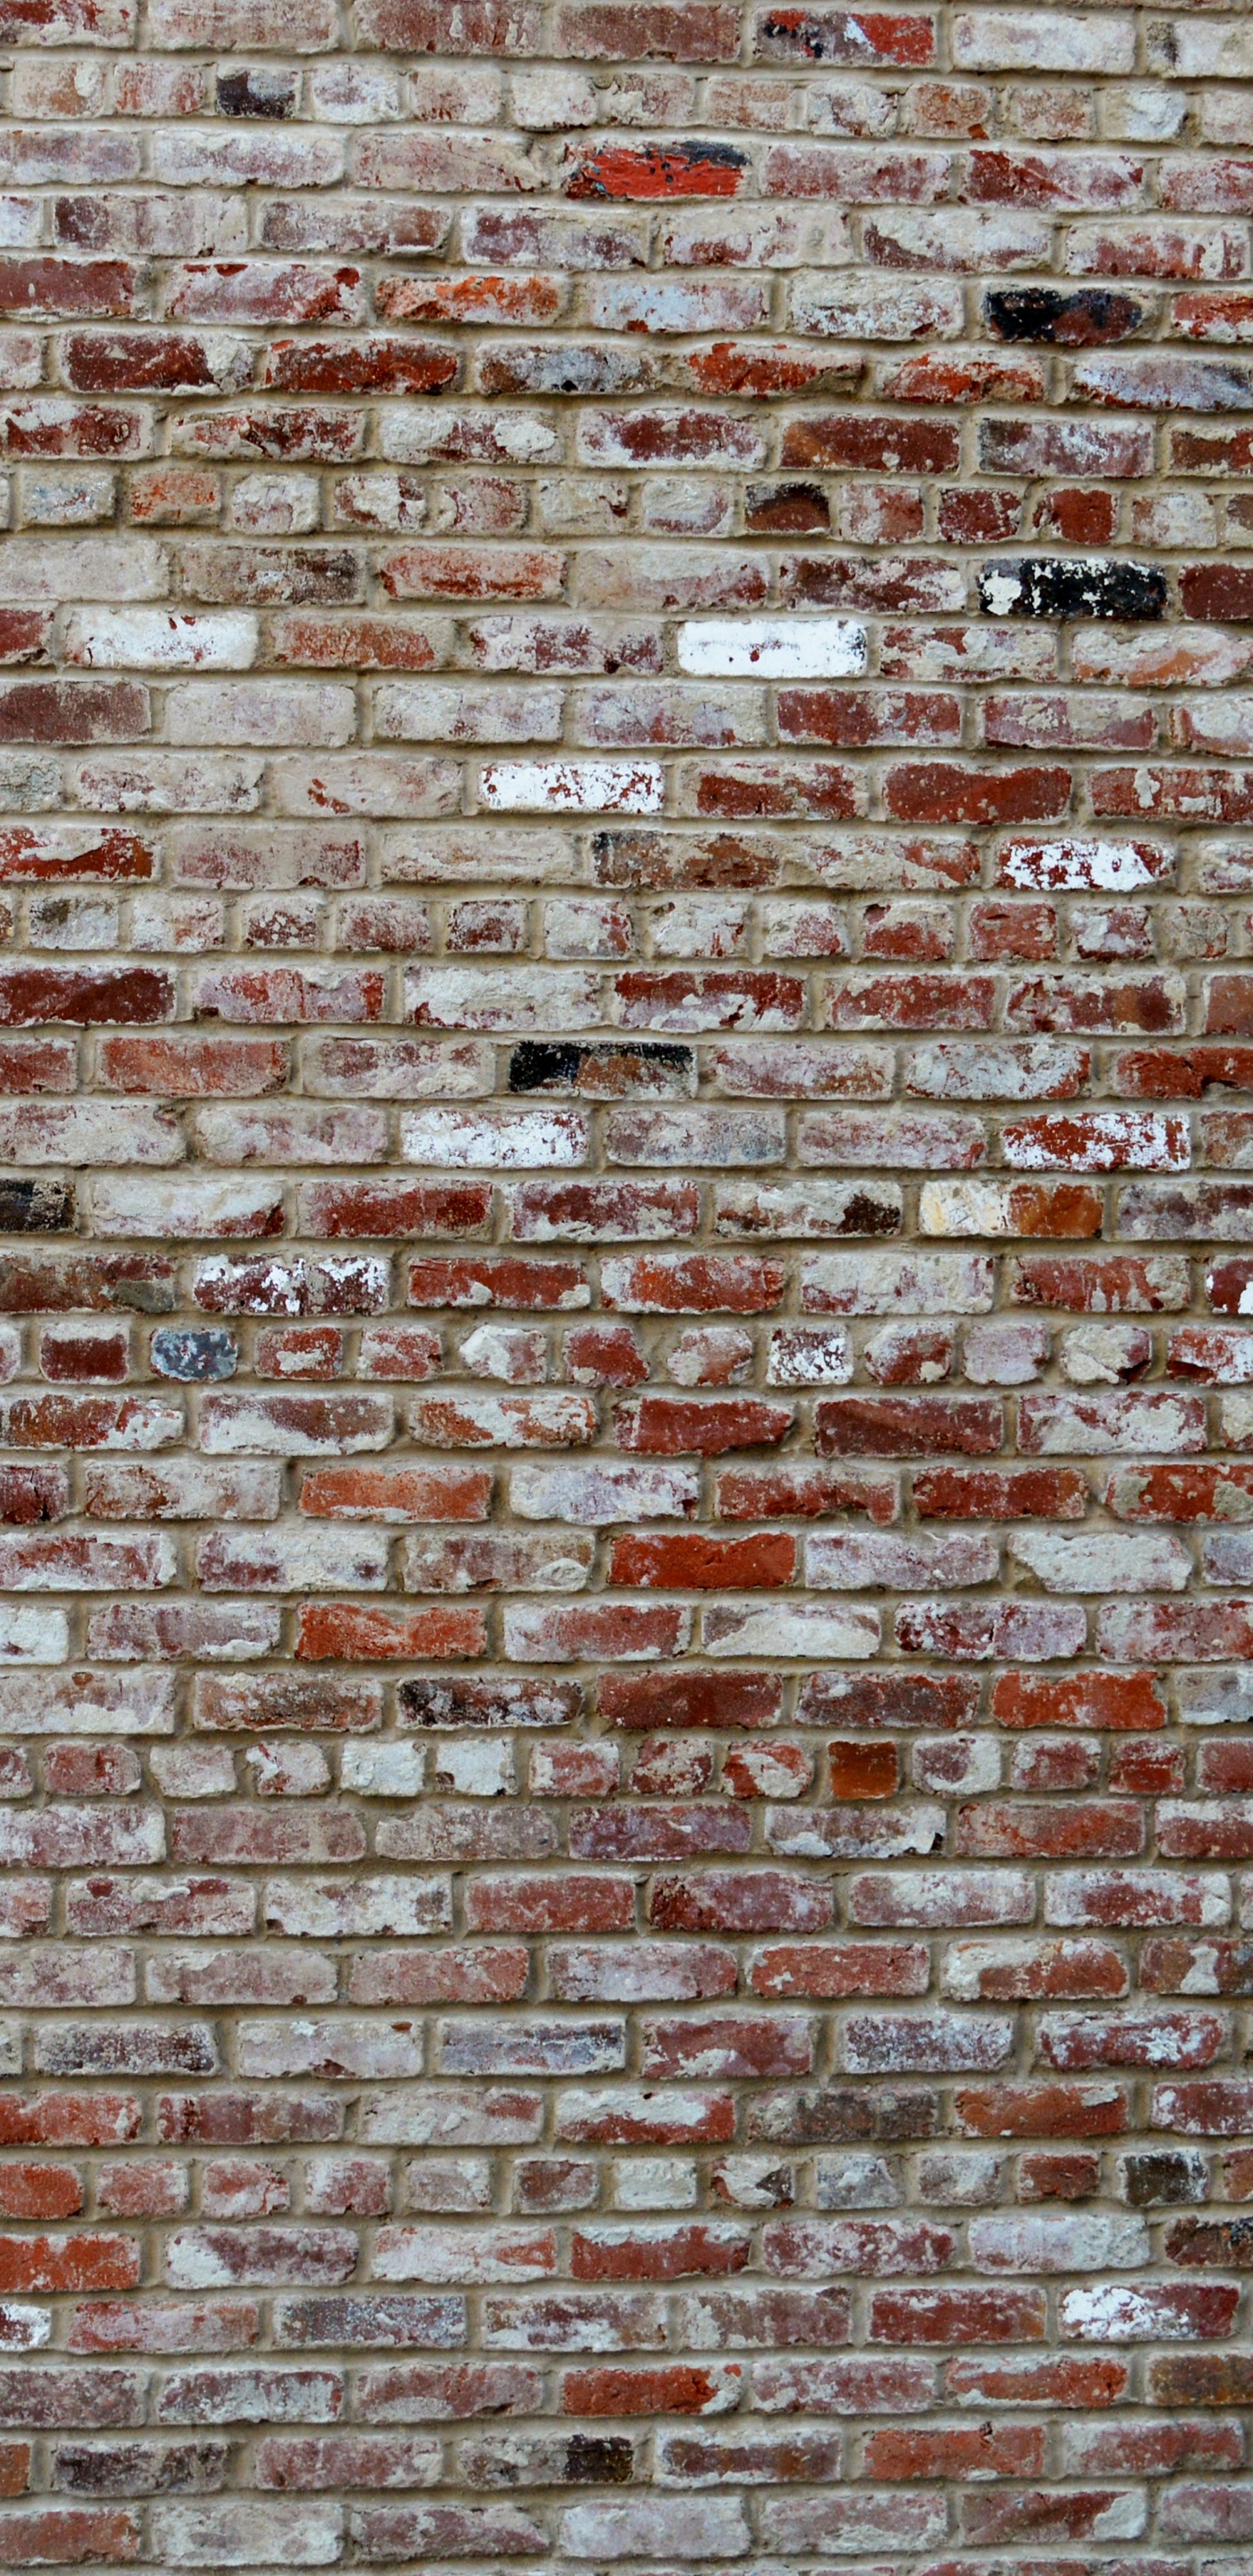 Brown and Black Brick Wall. Wallpaper in 1440x2960 Resolution